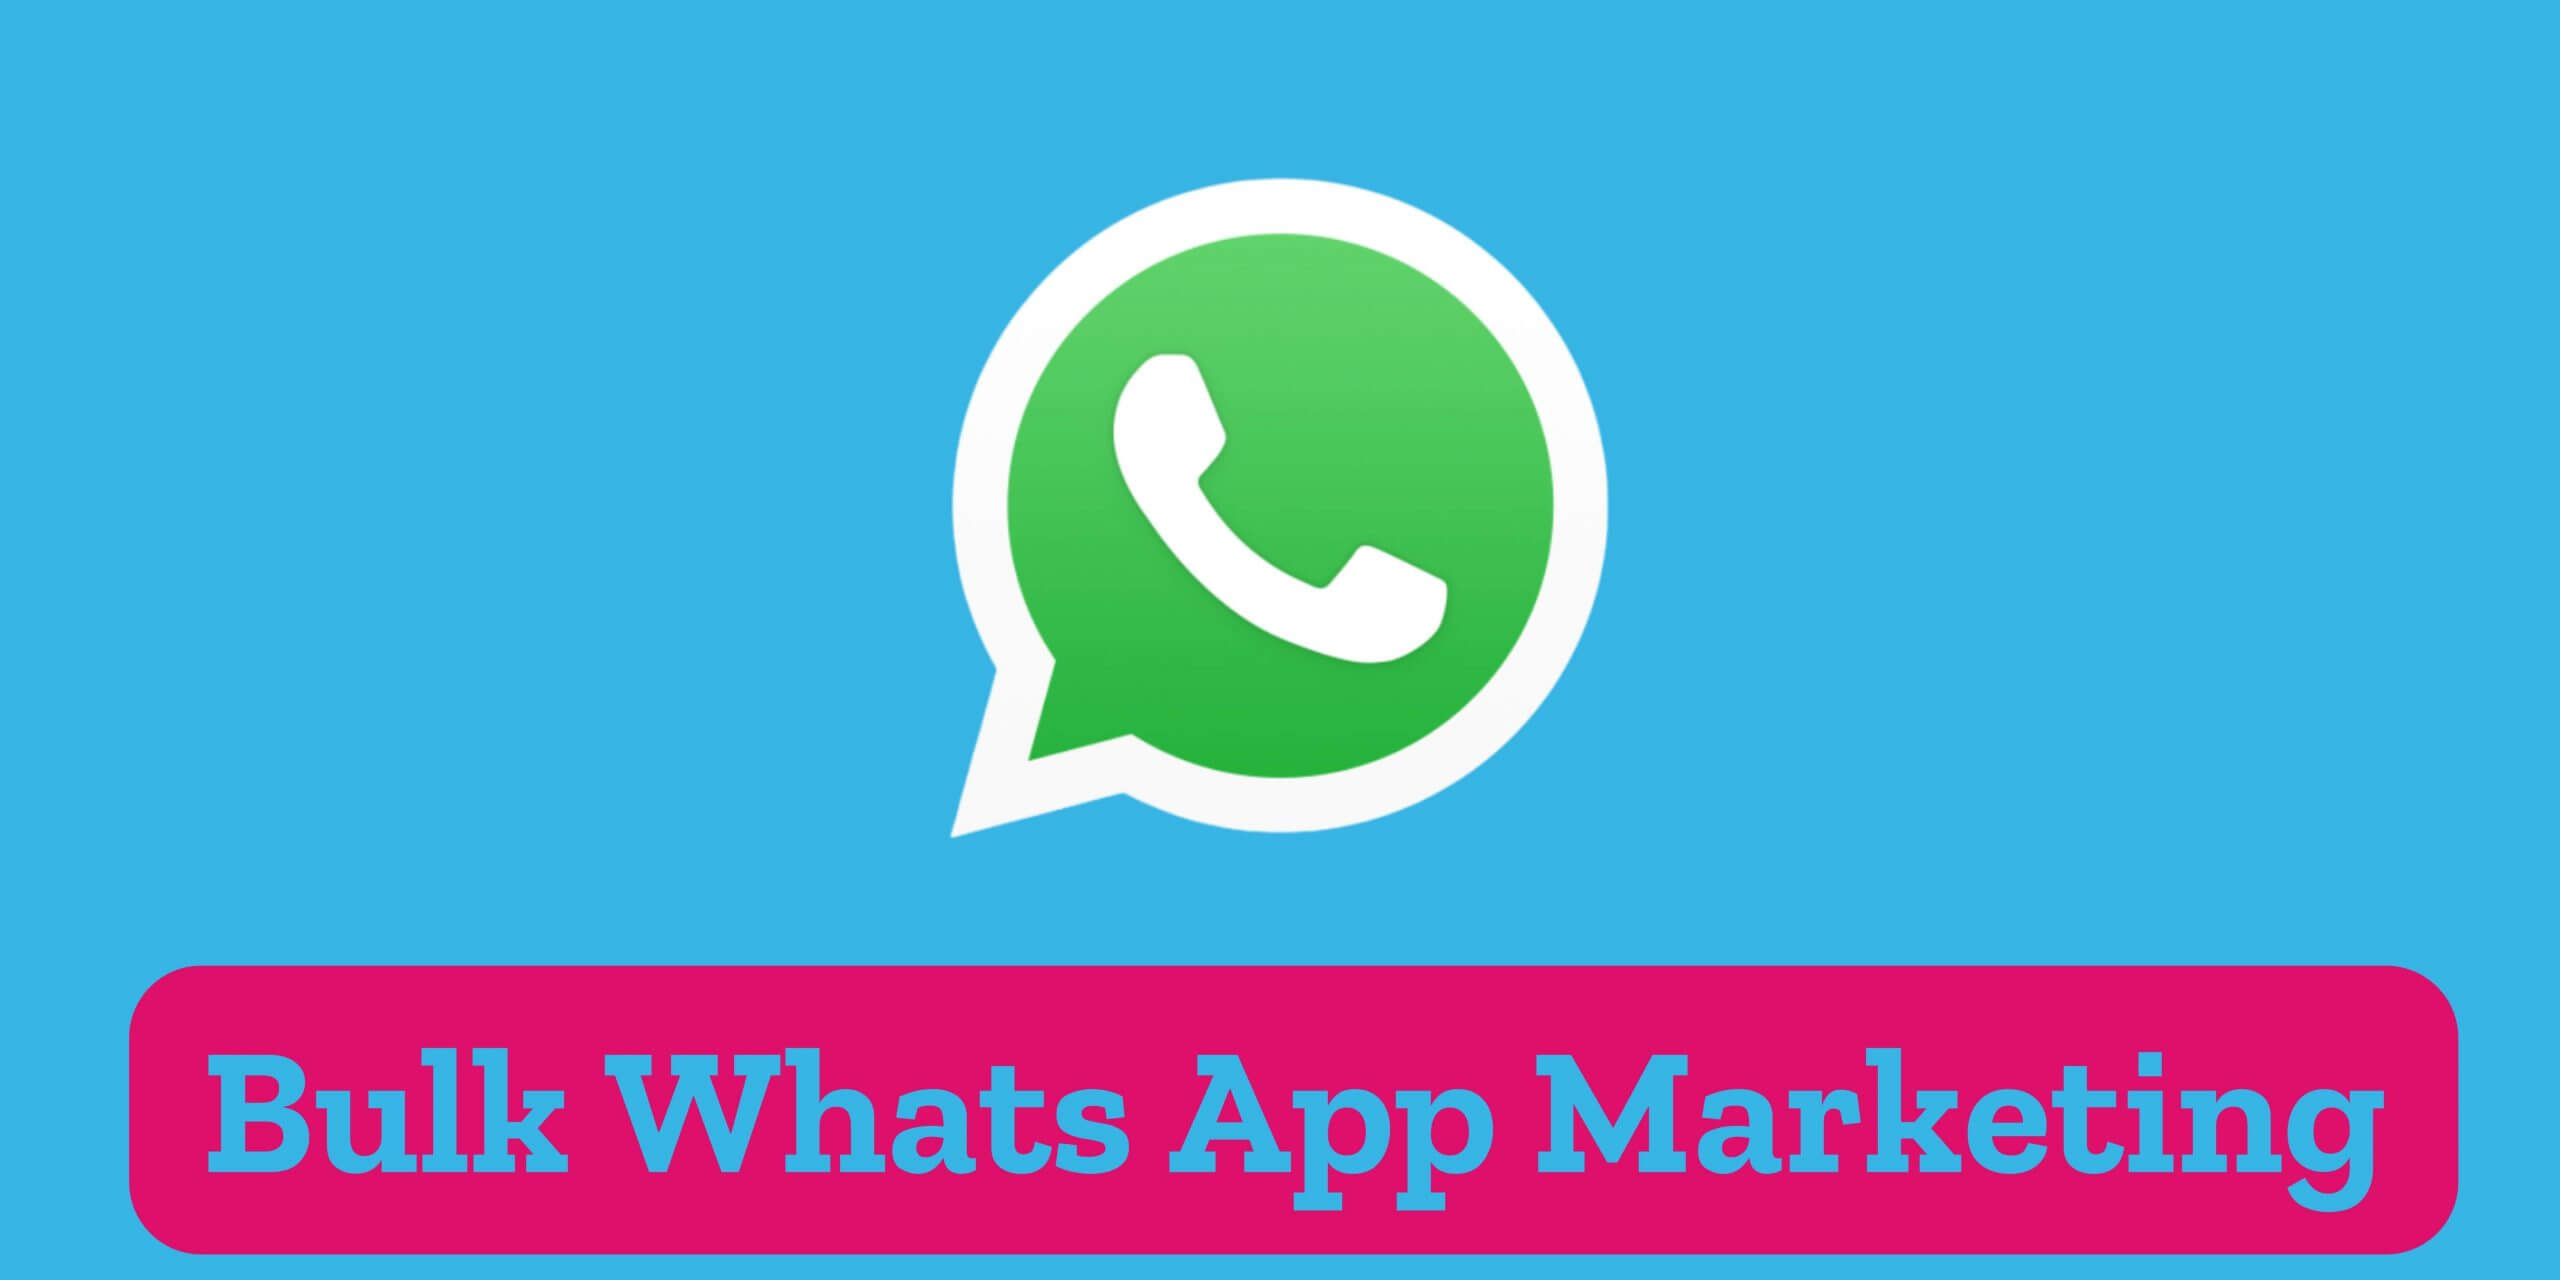 Sri Sai Technologies provides the cheapest whatsapp marketing services in all major cities of india. Our services are as low as 12paisa/sms. Our after sales technical support is also commentdable.